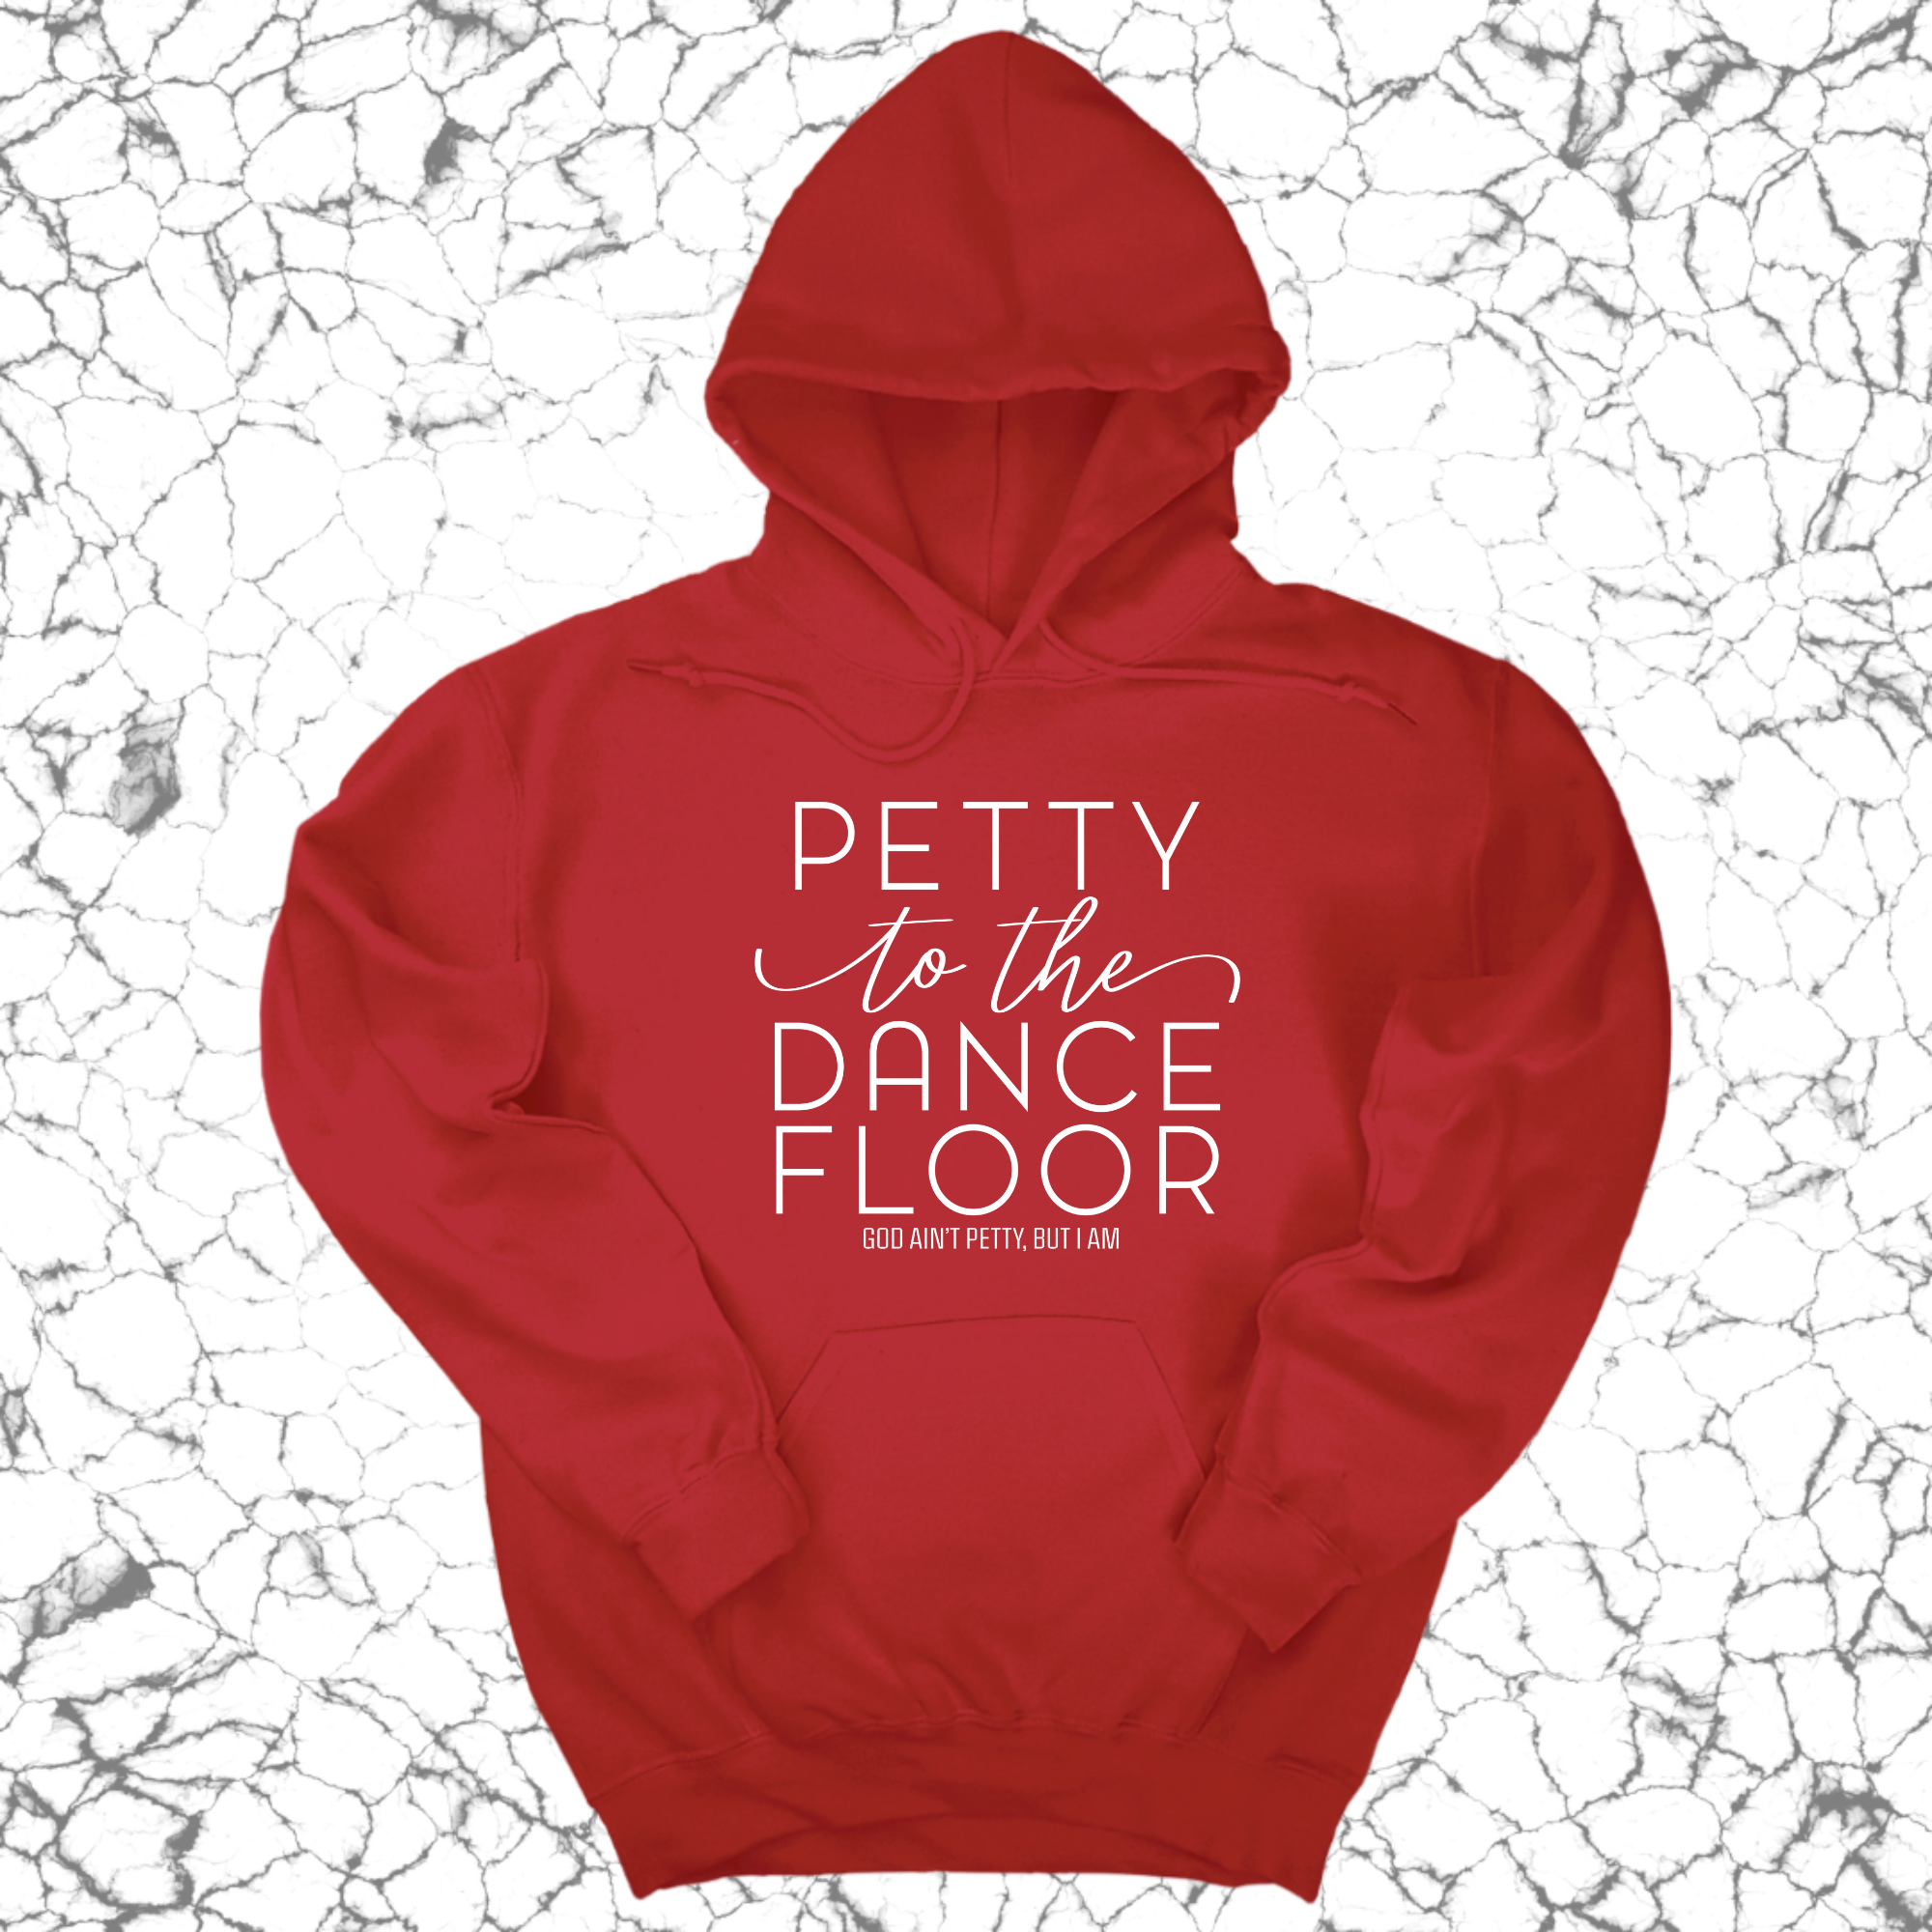 Petty to the Dance Floor Unisex Hoodie-Hoodie-The Original God Ain't Petty But I Am